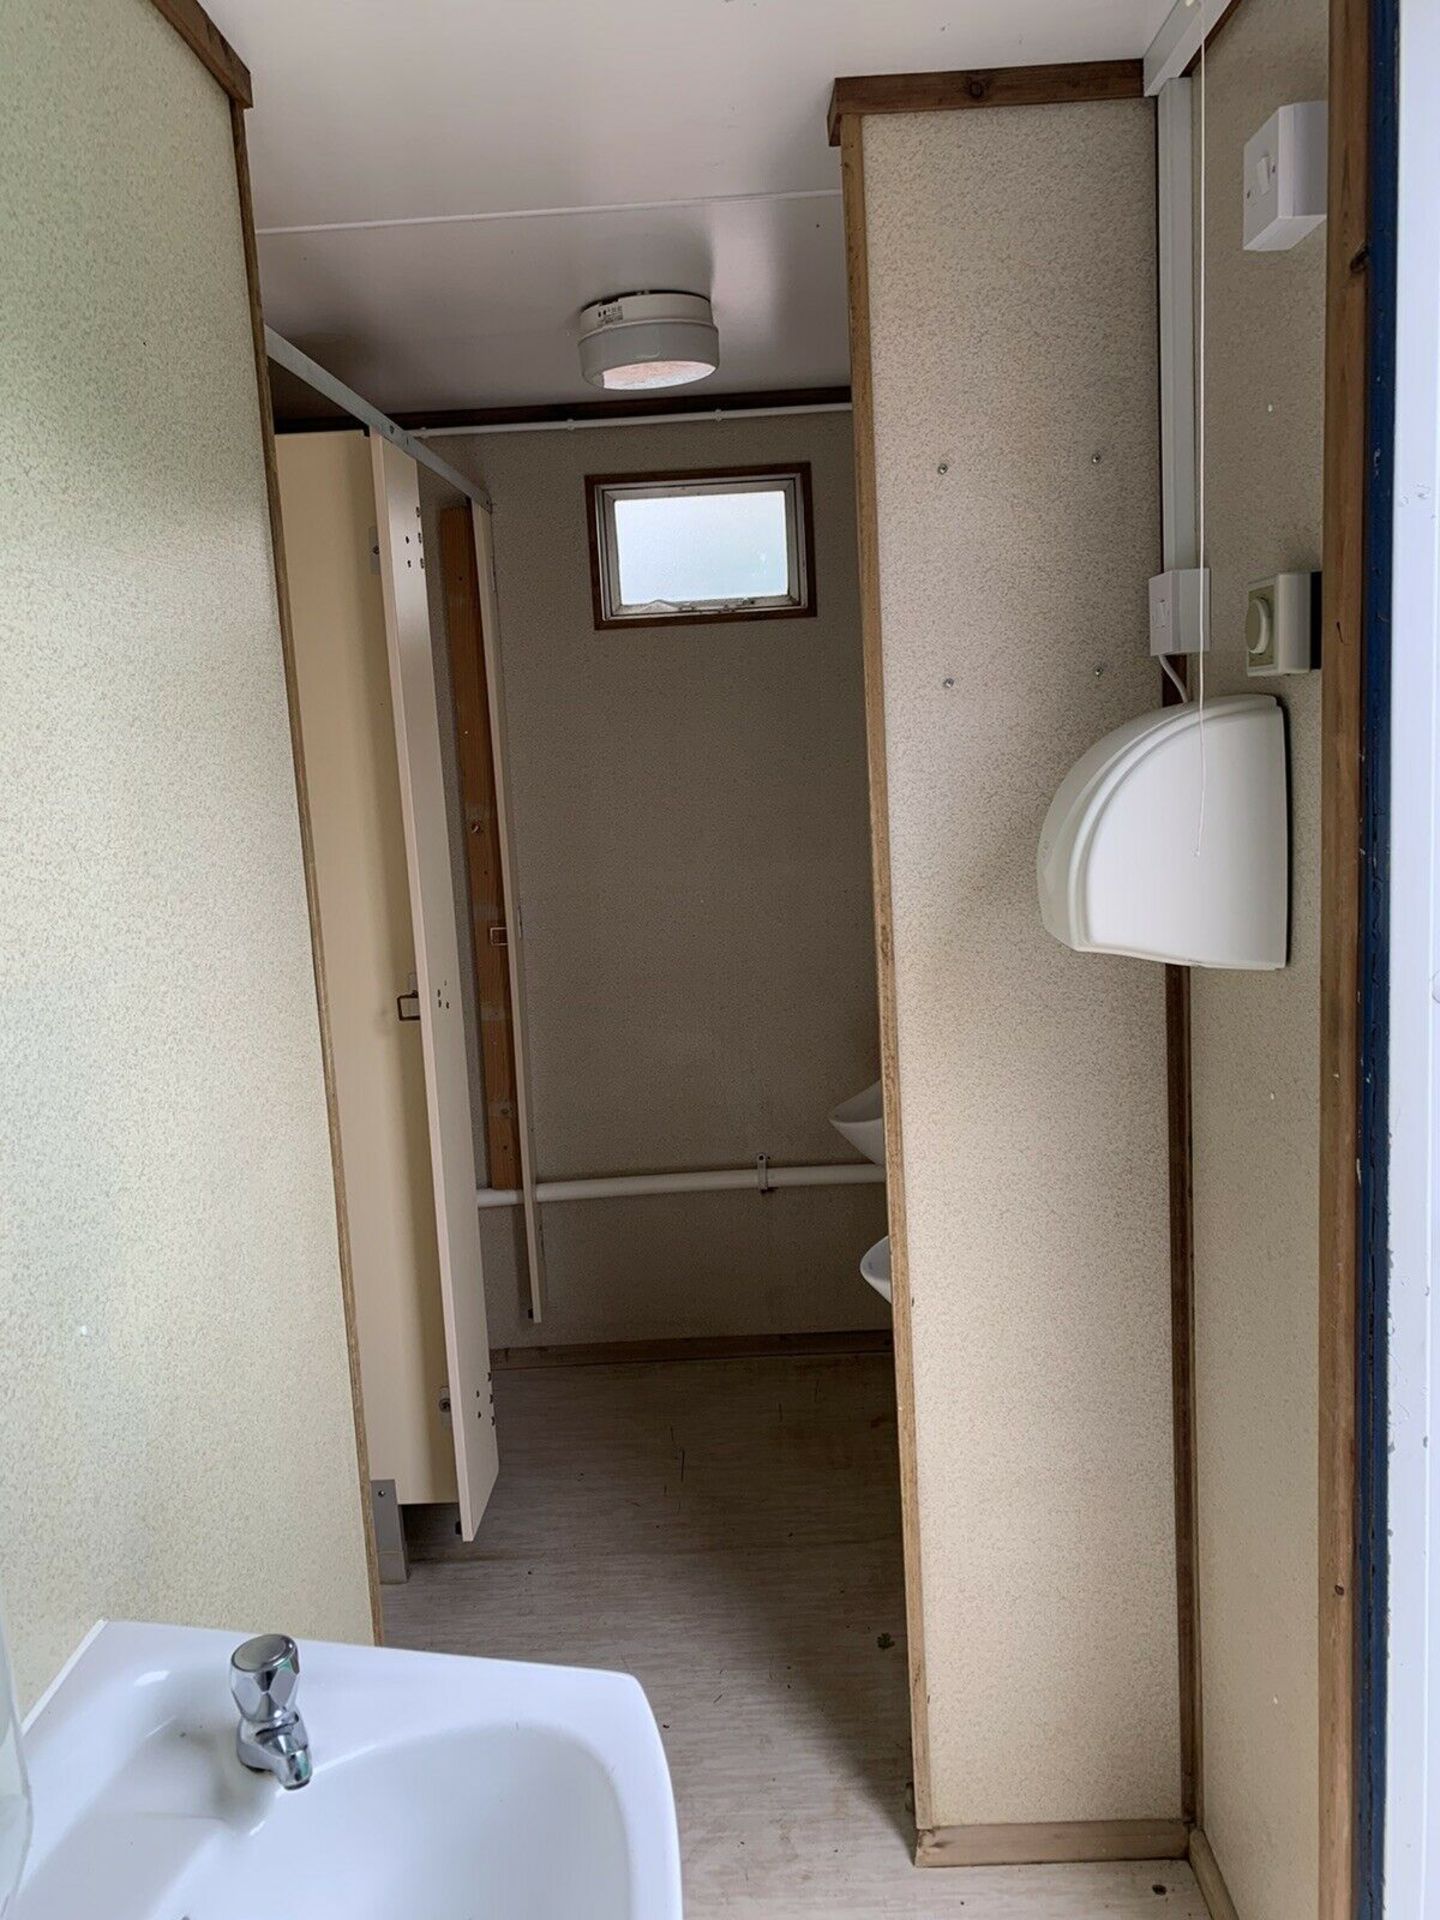 Portable Shower Drying Room With Toilets - Image 7 of 11